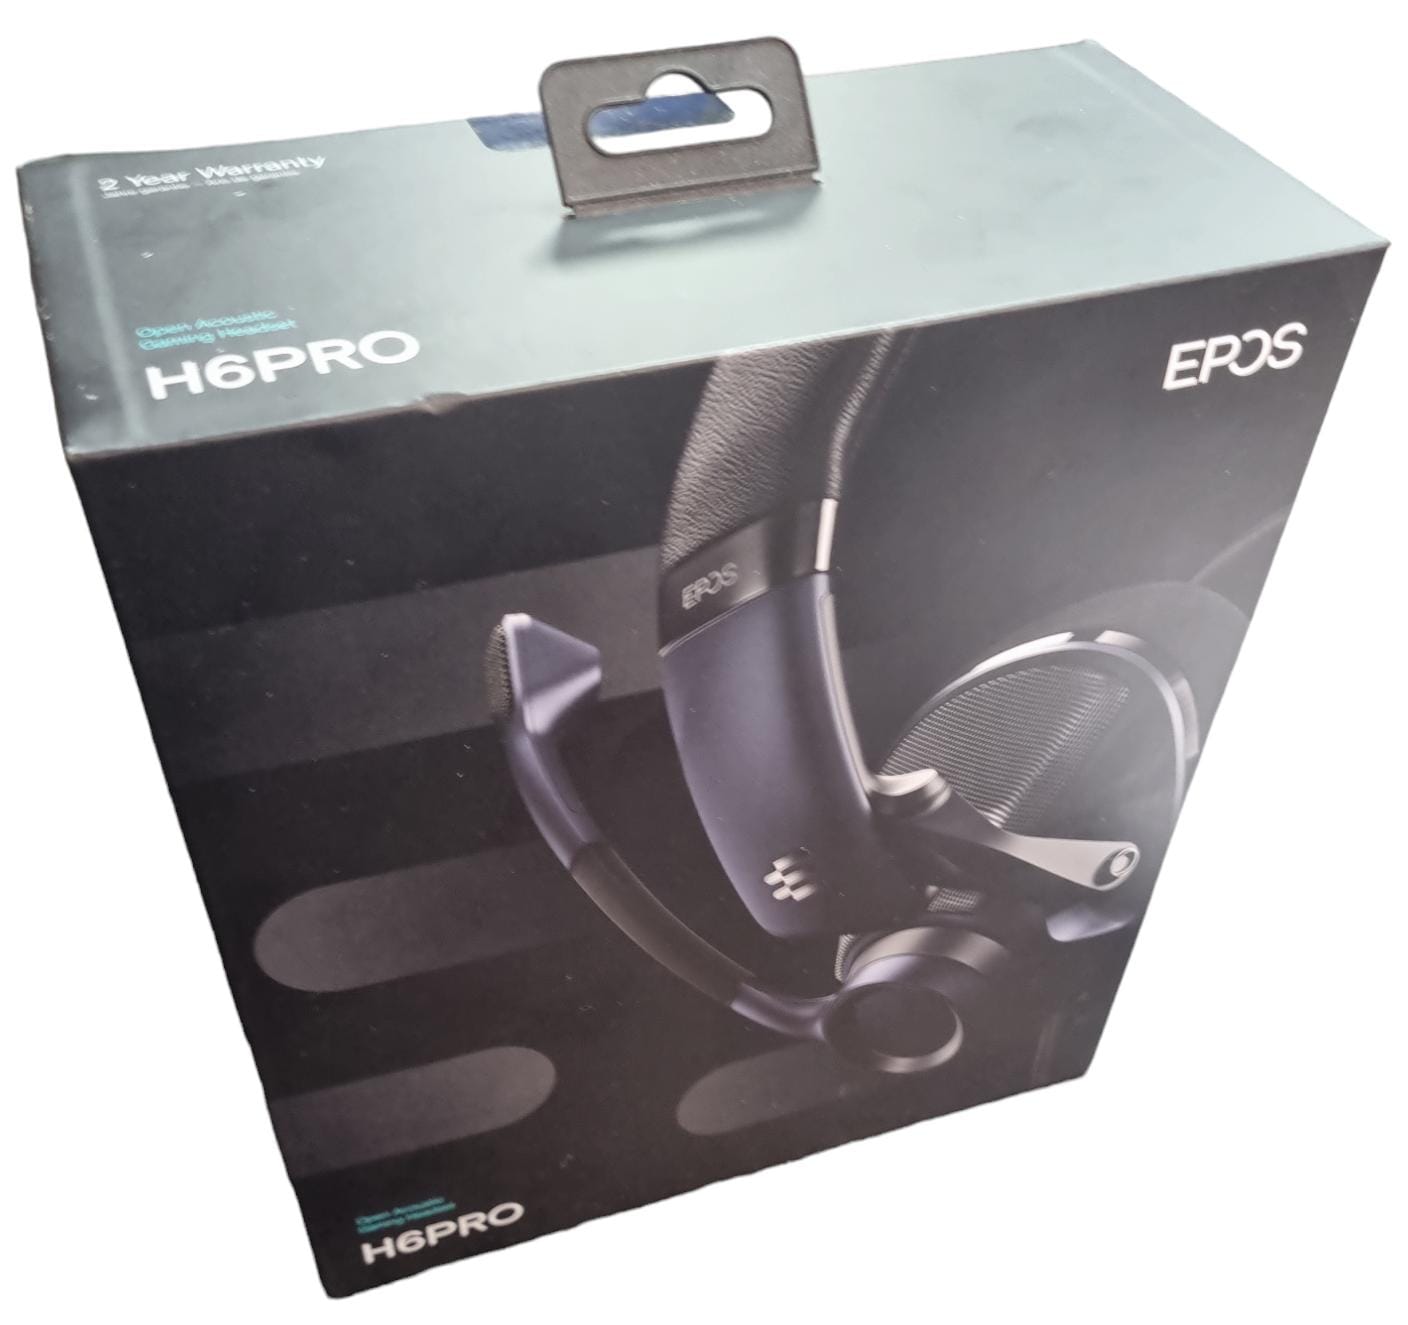 EPOS H6 Pro Open Acoustic Gaming Headset - NEW SEALED